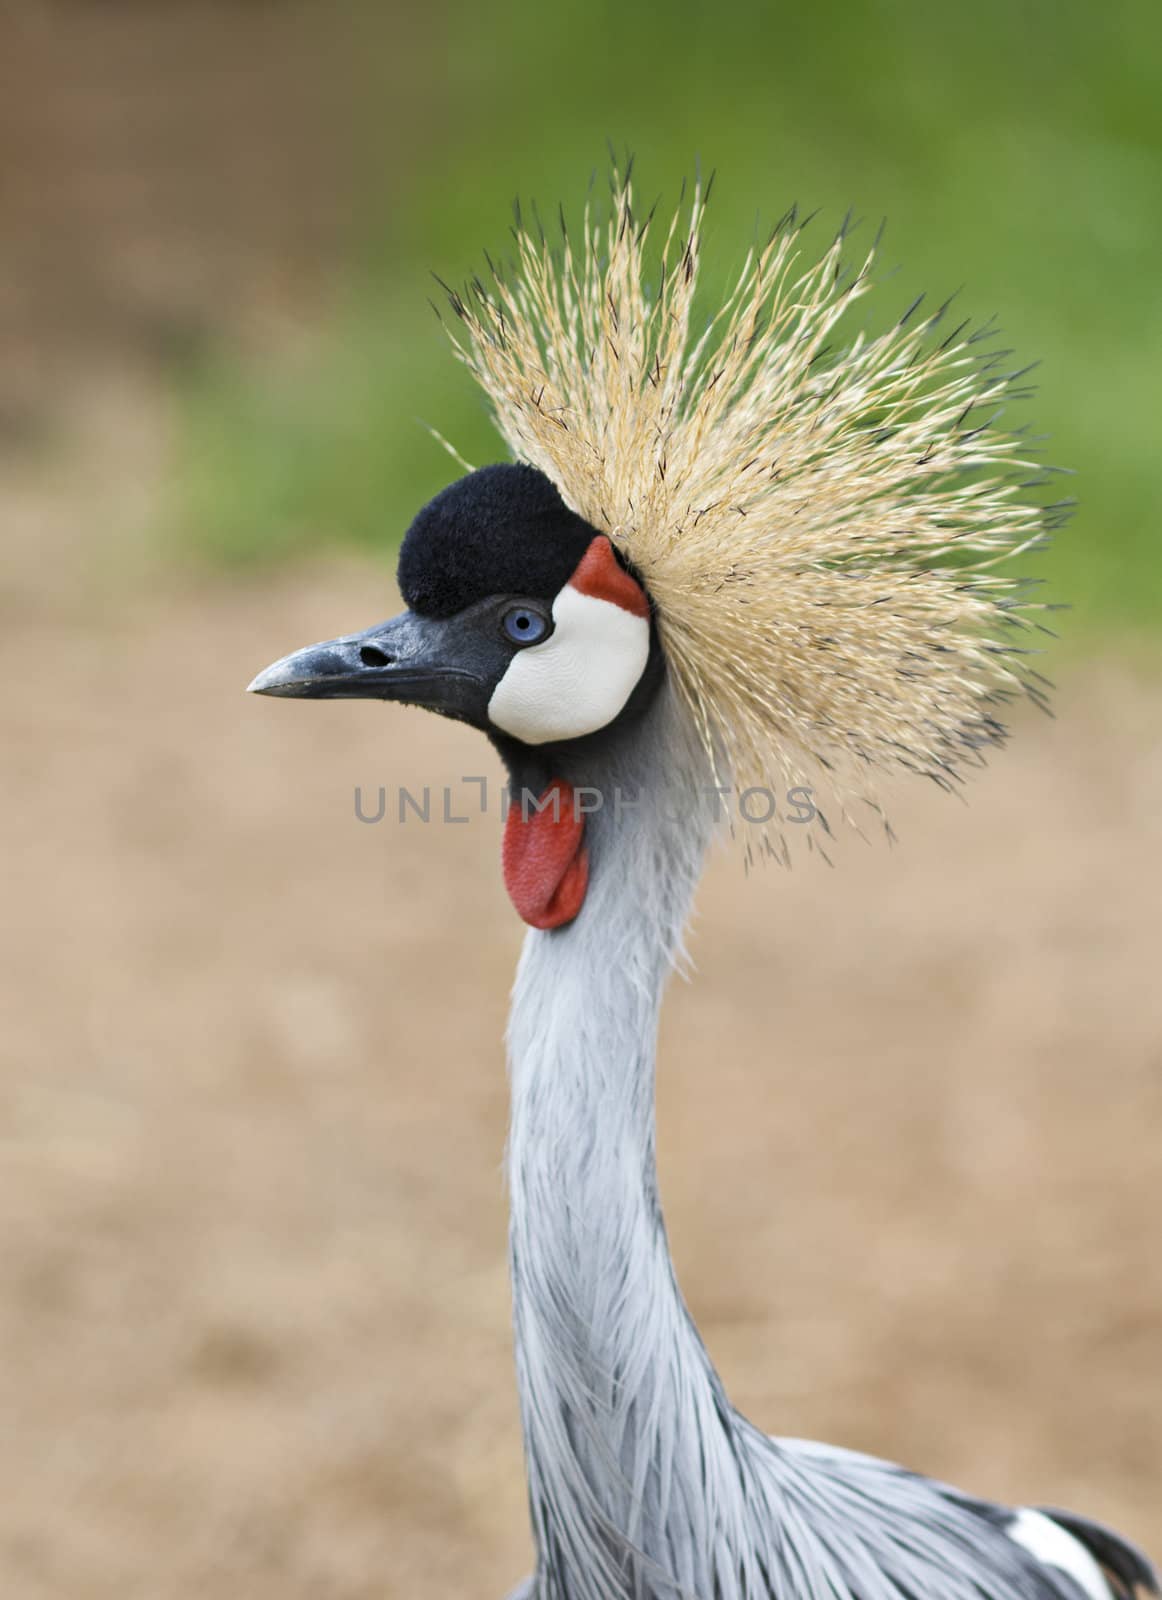 A close up shot of a Grey Crowned Crane (Balearica regulorum). This bird feeds on insects, reptiles, small mammals, as well as grass seeds. It is the national bird of Uganda.